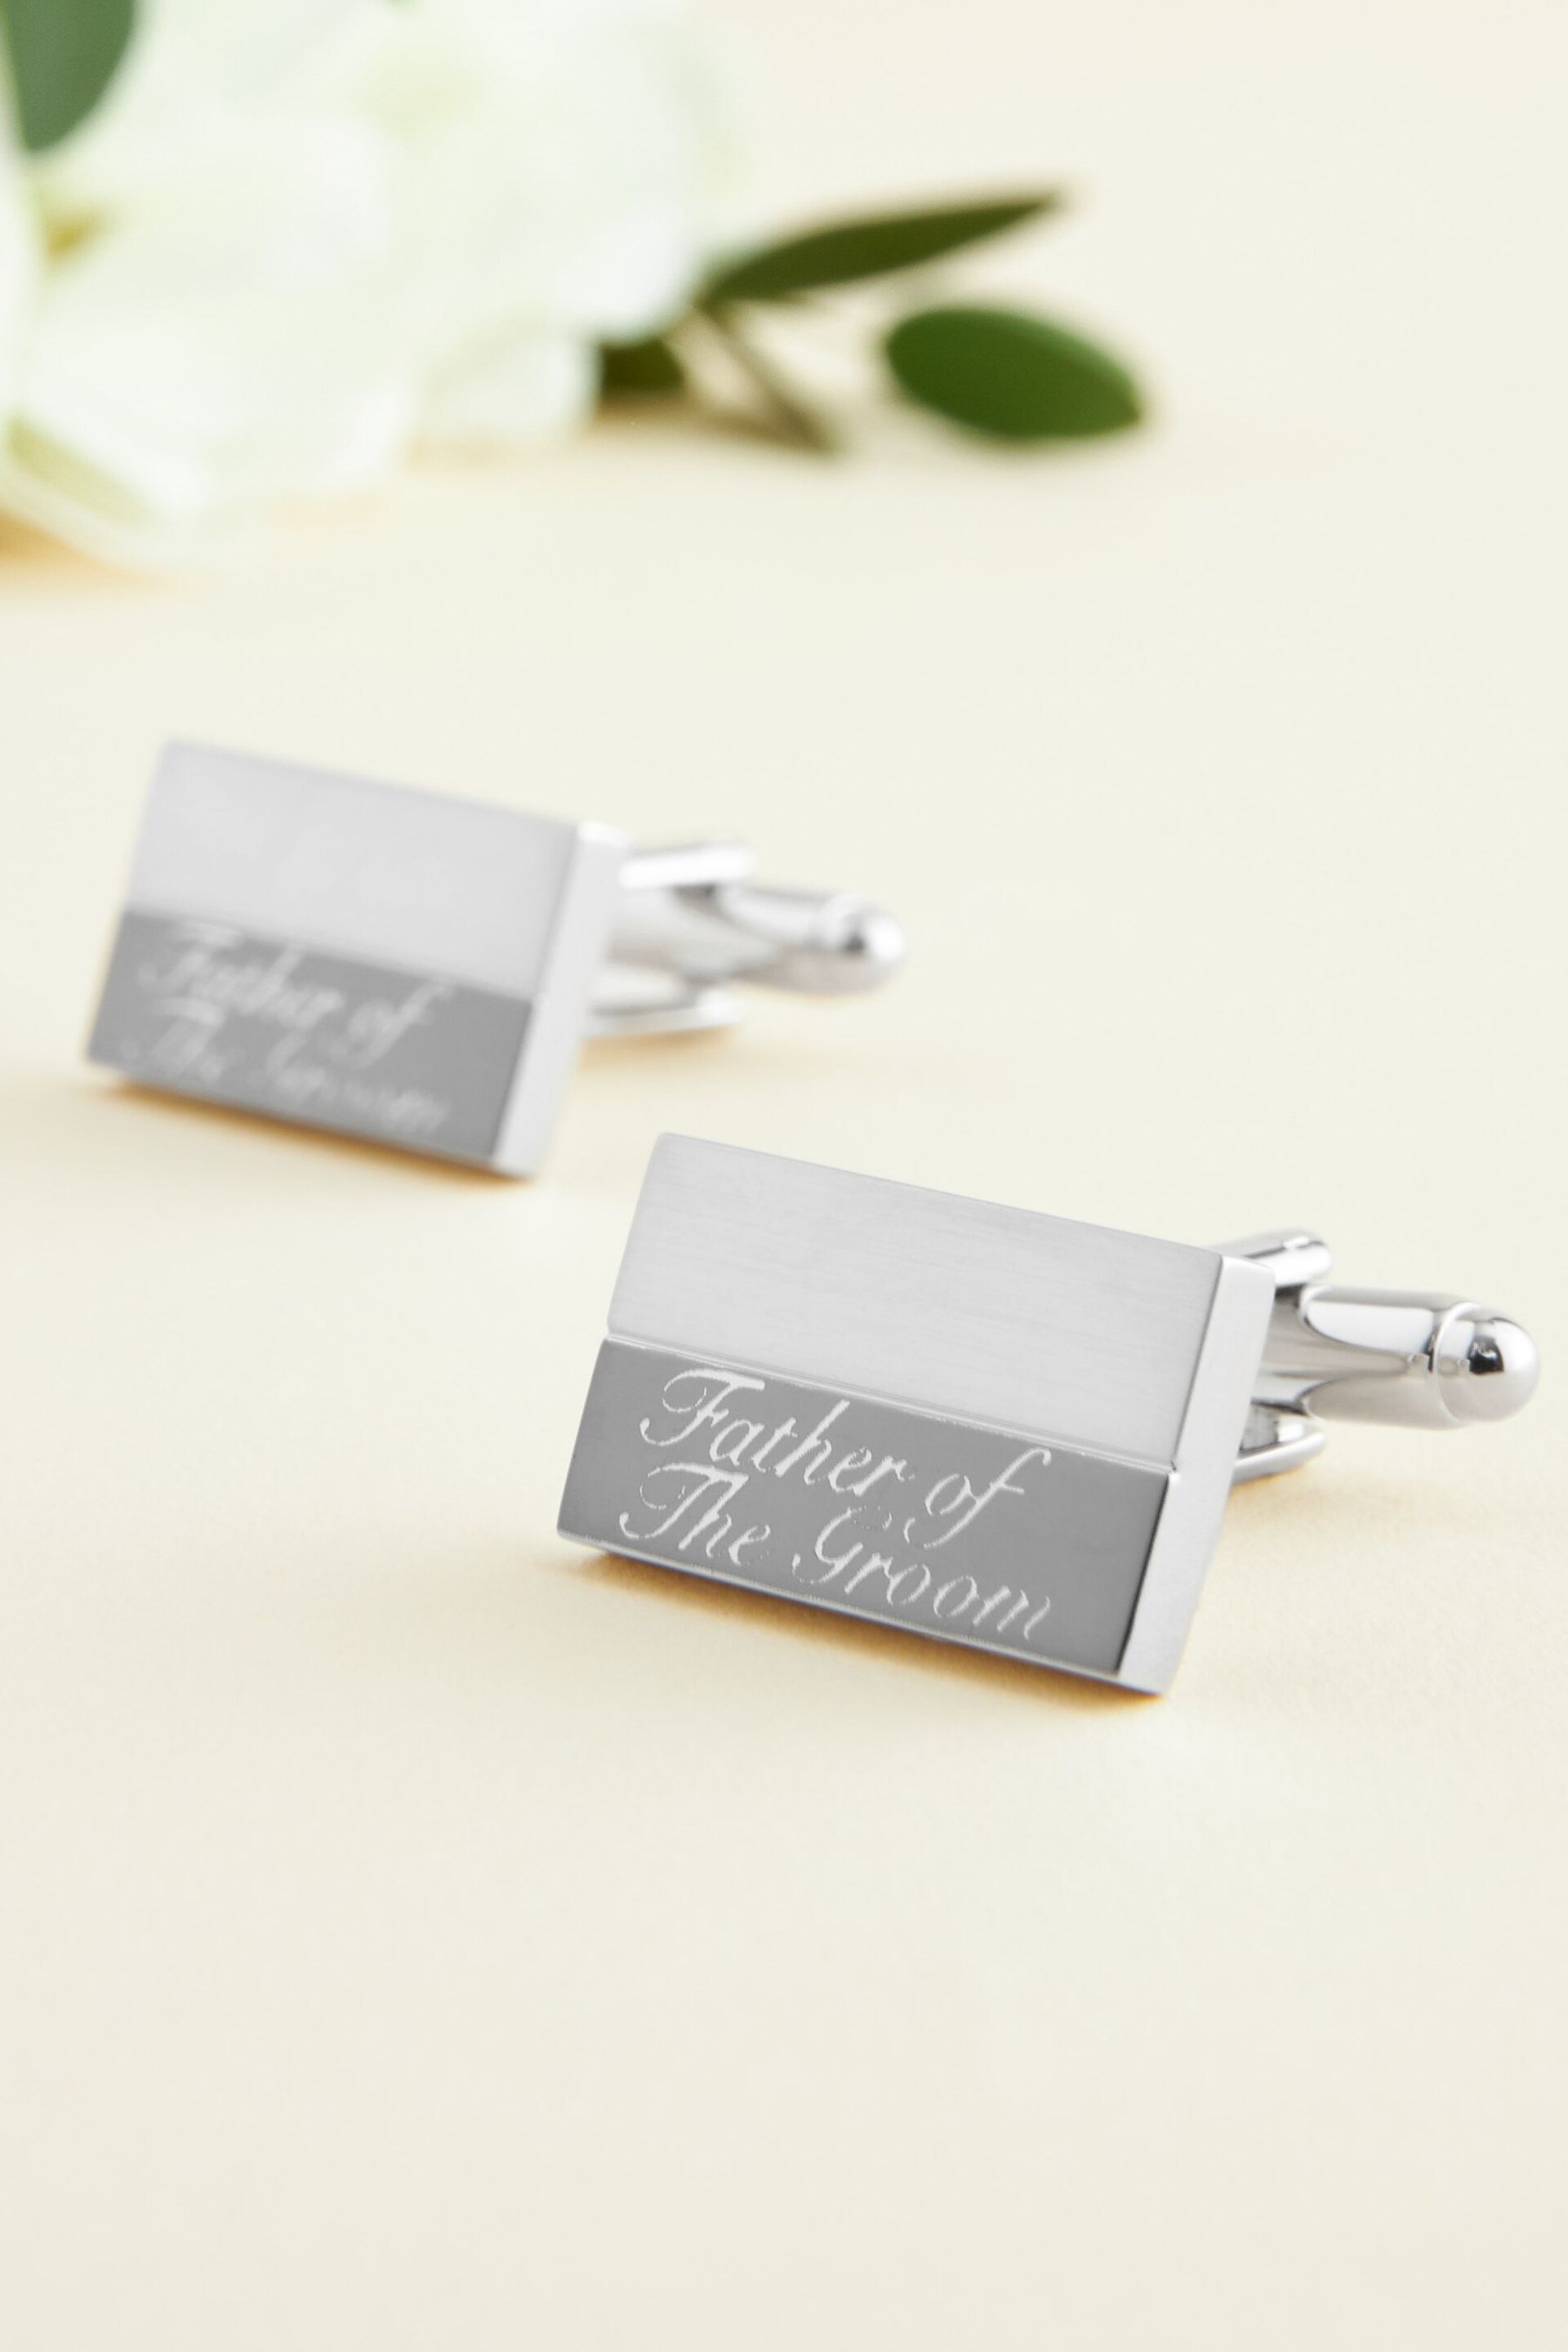 Silver Tone Father of the Groom Engraved Wedding Cufflinks - Image 1 of 5